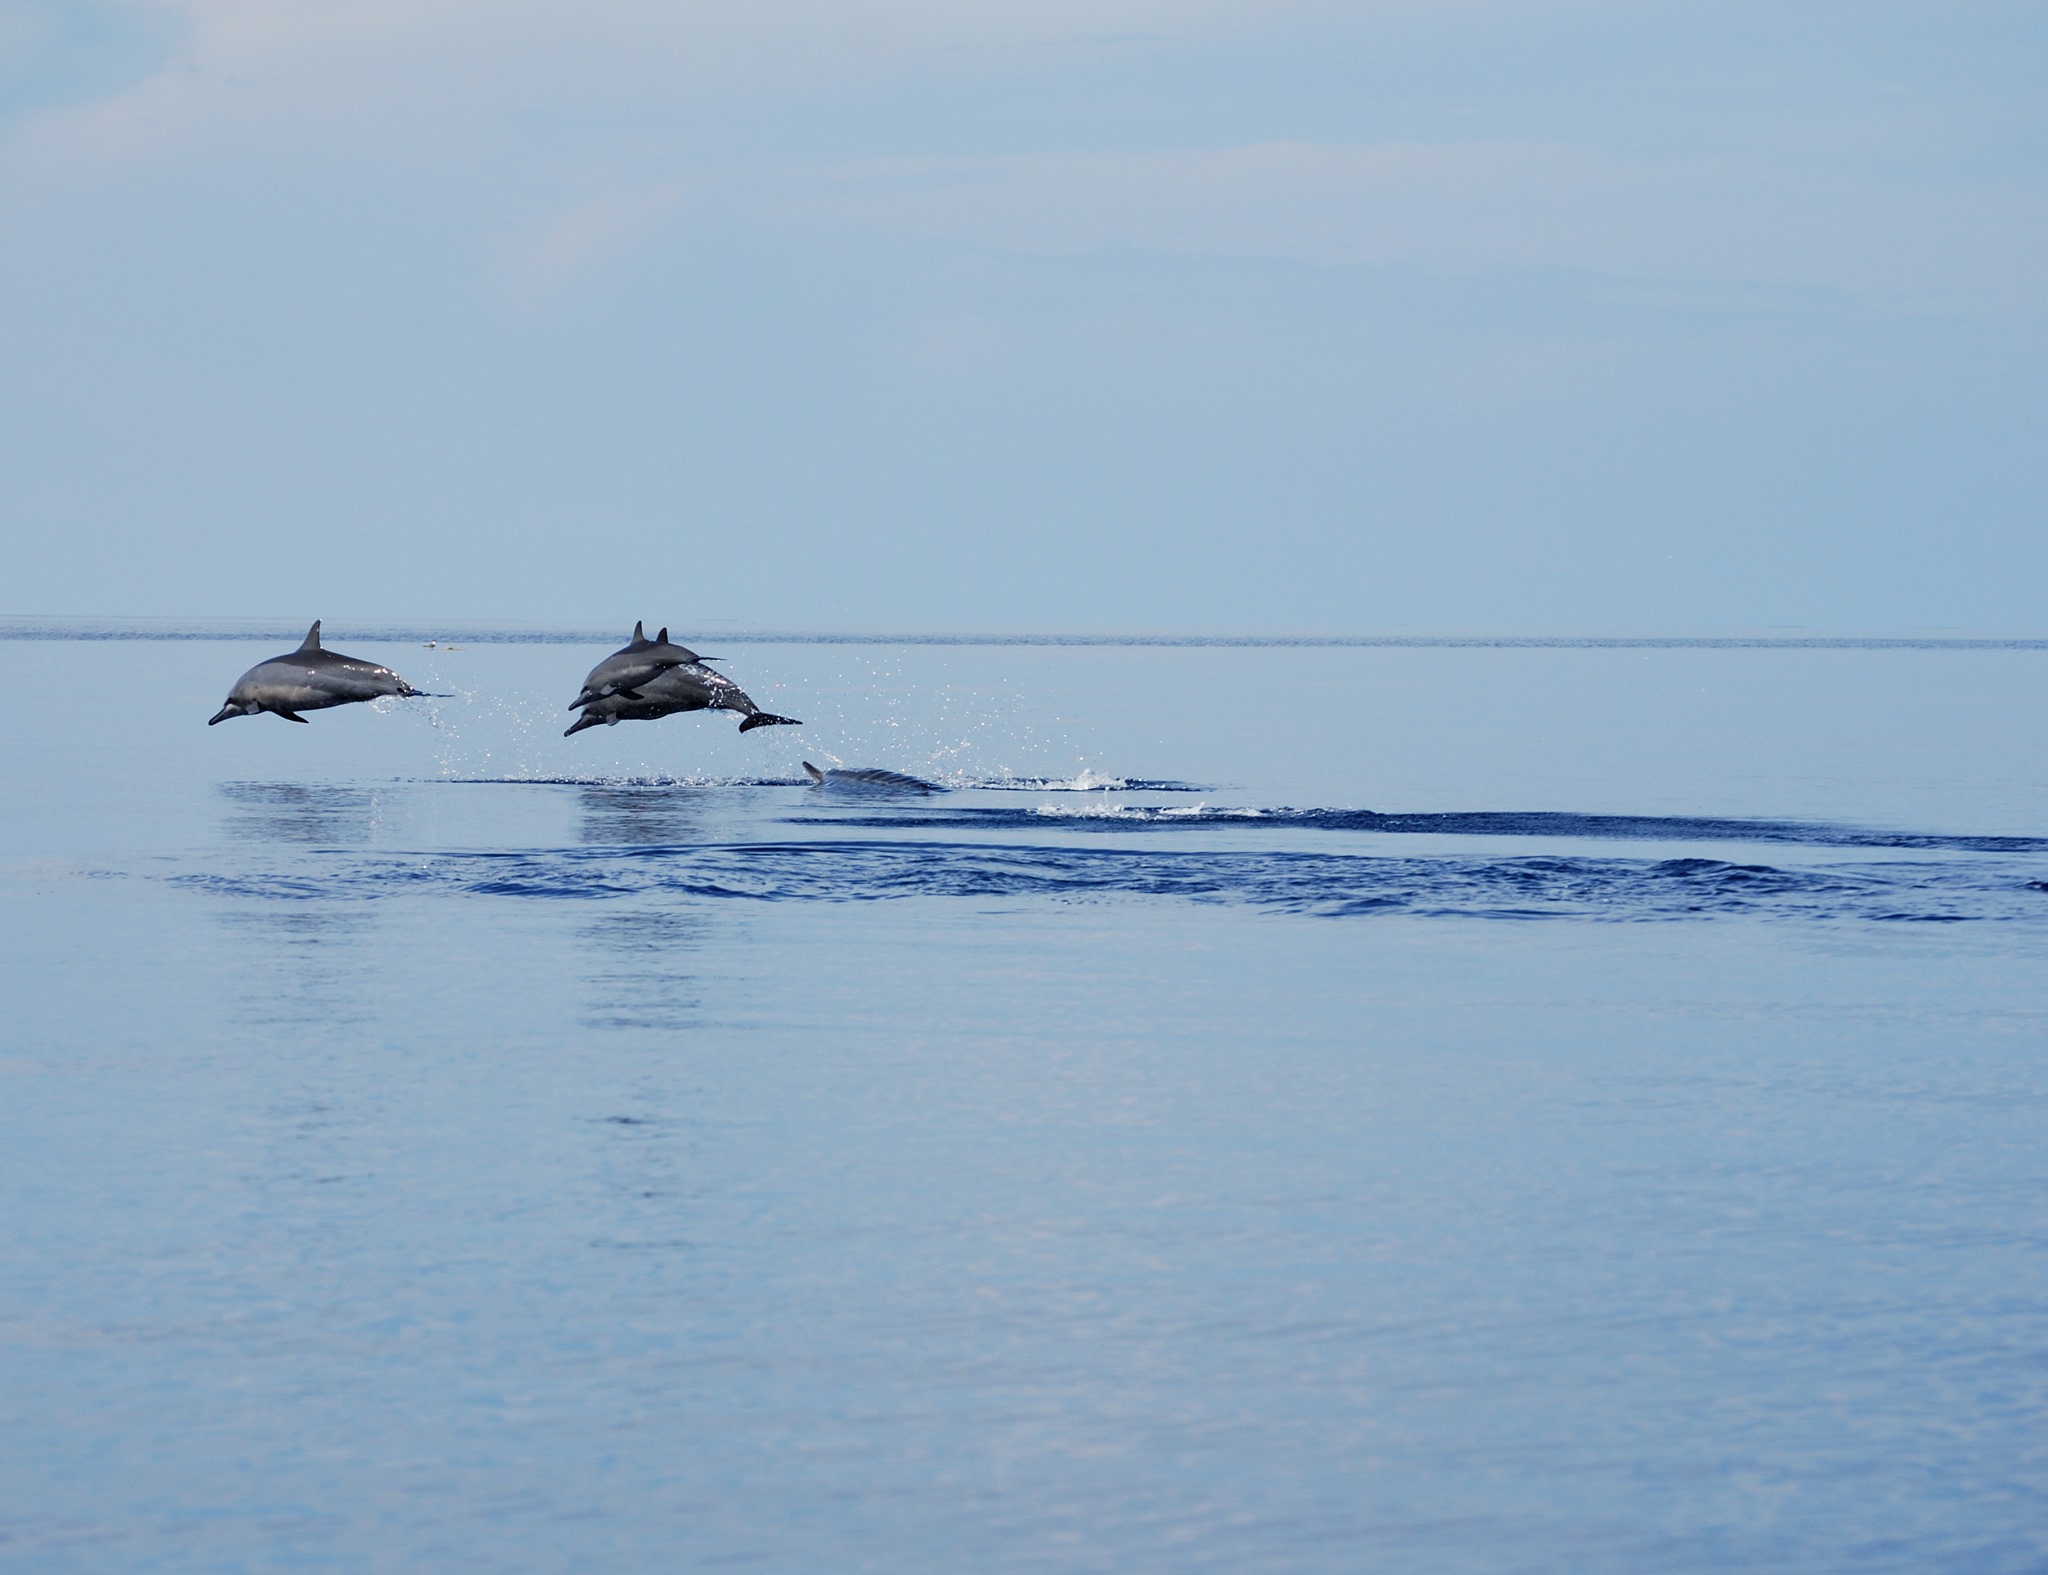 Spinner dolphins playing in the park’s waters